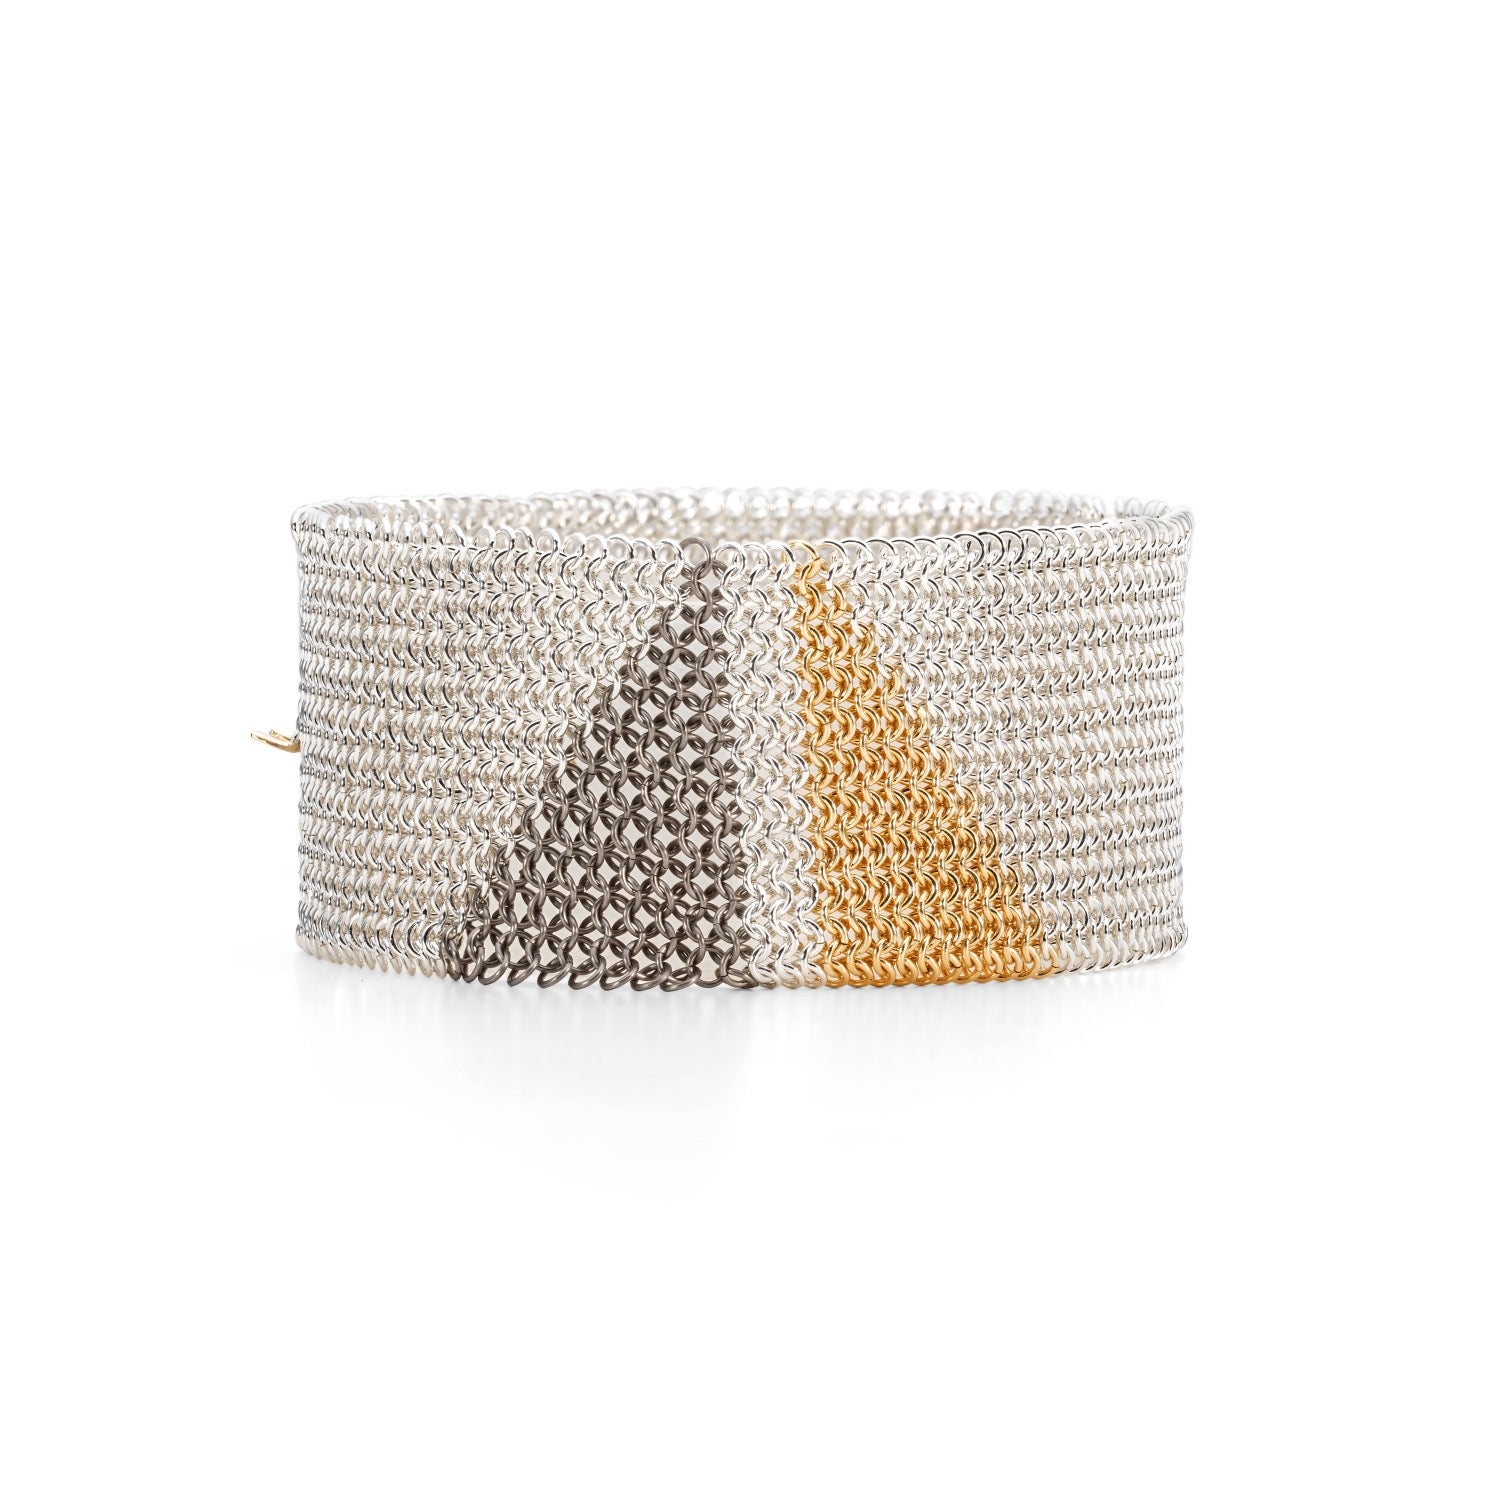 Sunlit Tor's Collection, chainmail bangle bracelet silver, 18ct yellow gold and titanium handmade jewellery by Corrinne Eira Evans